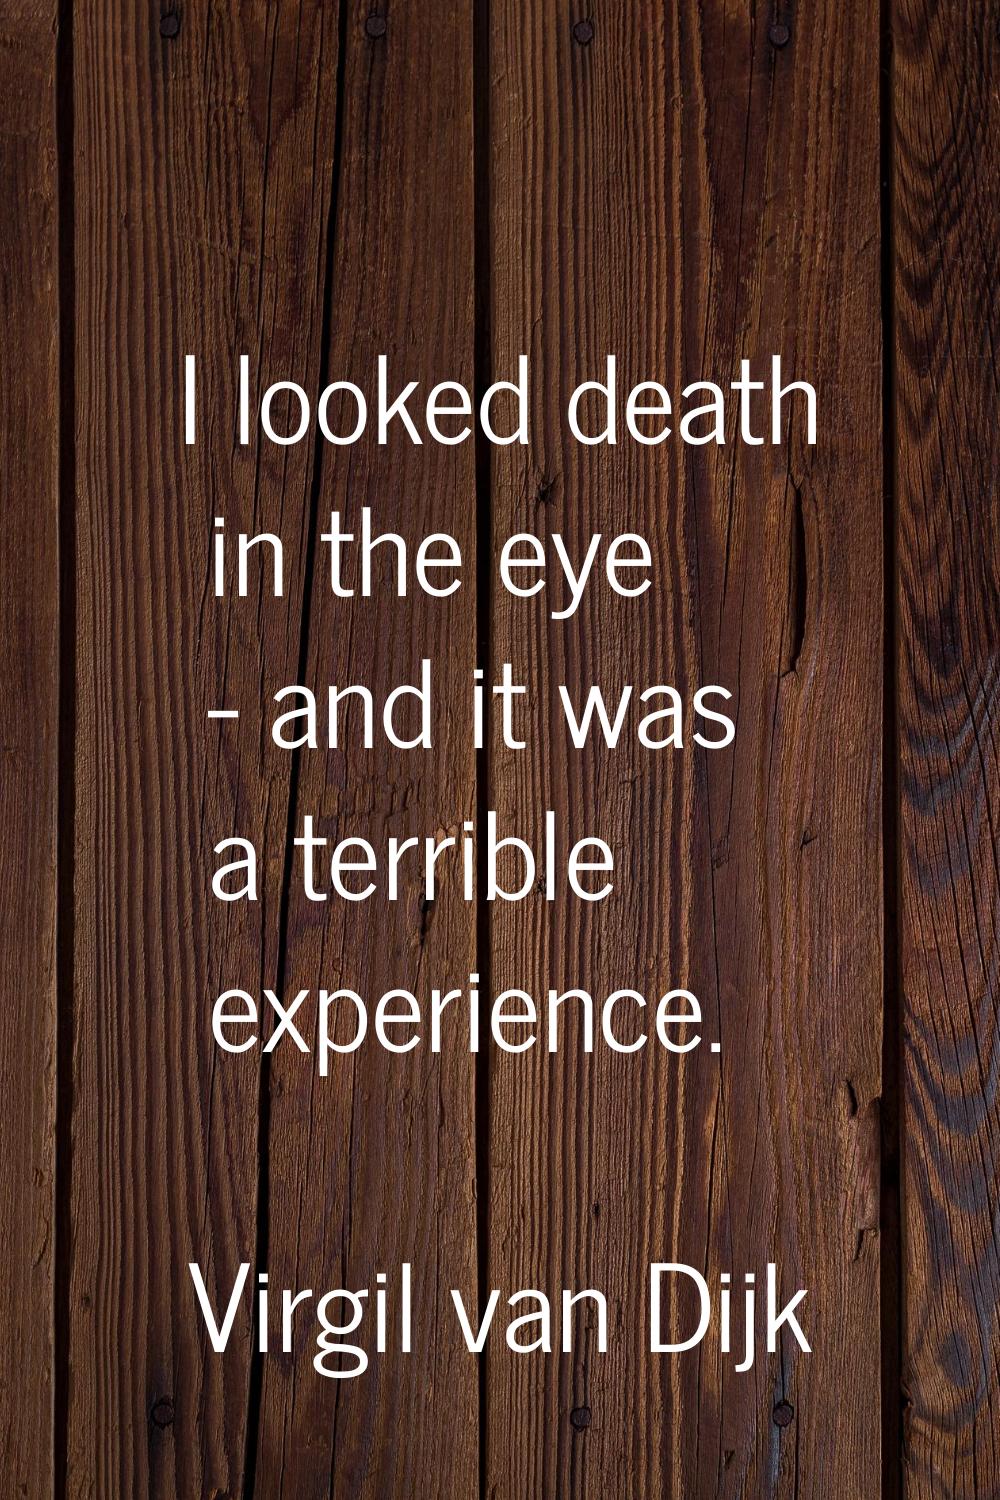 I looked death in the eye - and it was a terrible experience.